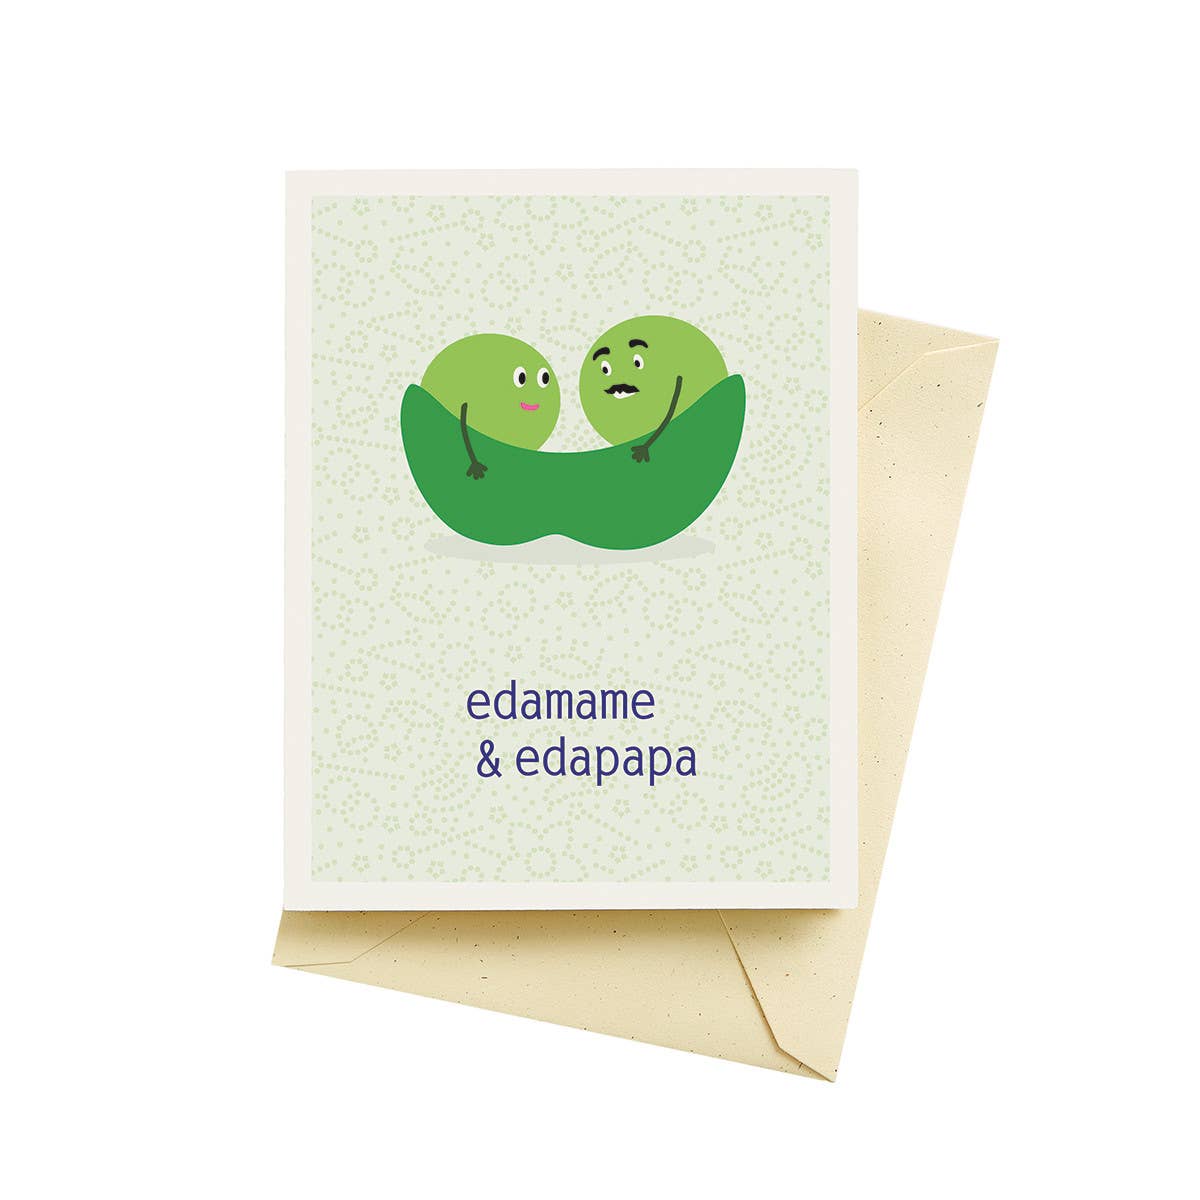 Two edamames in a pod with text below that reads "edamame & edapapa" 